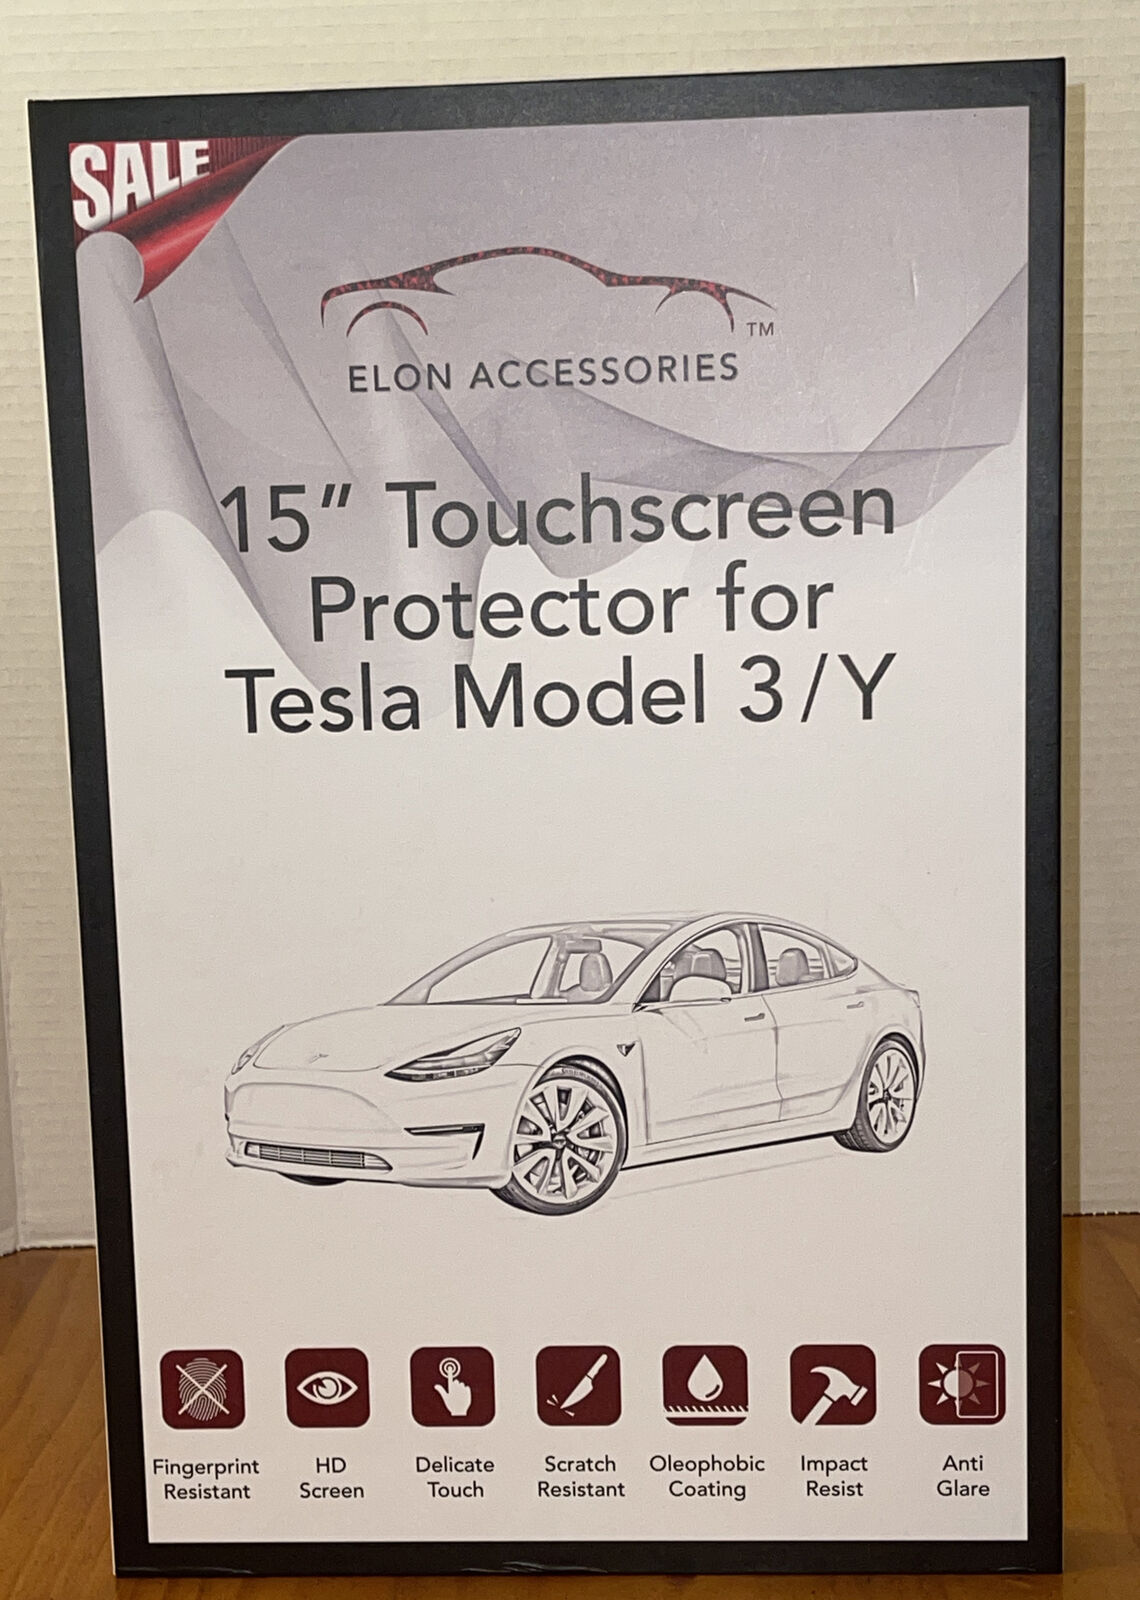 Hd 15" Screen Protector Tesla Model 3 / Y Navigation Touchscreen Tempered Glass